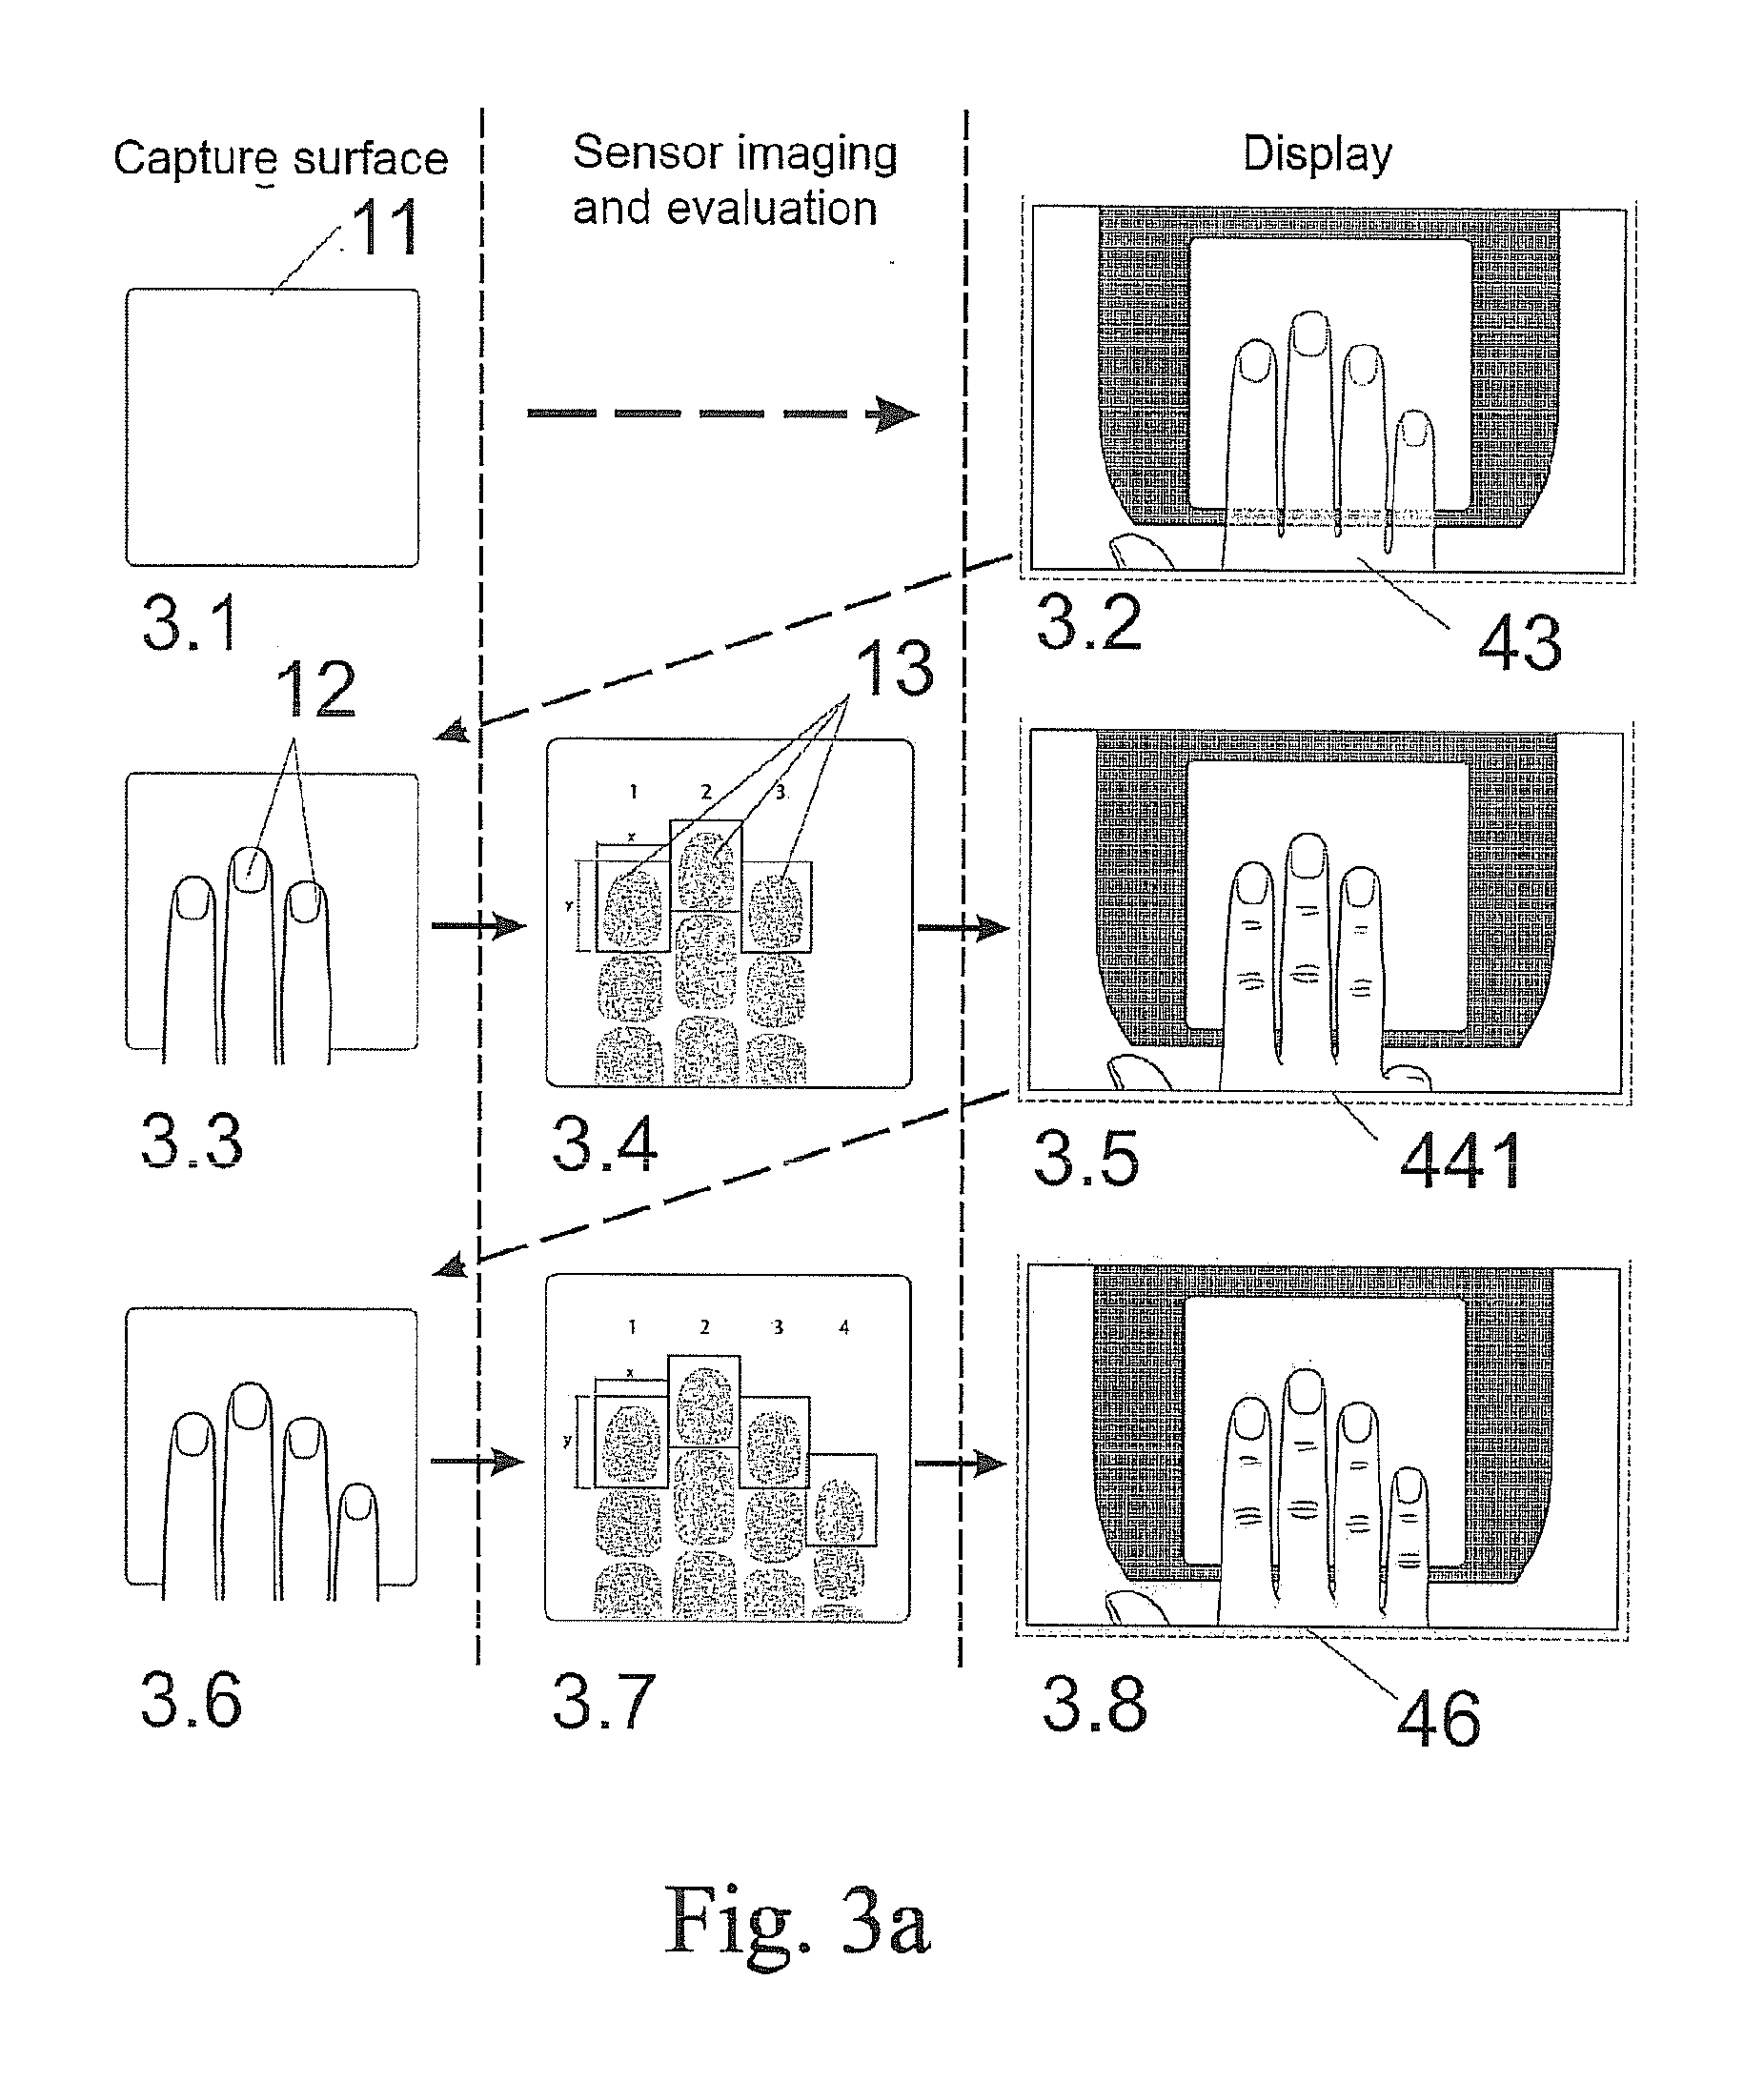 Method and Device for Capturing Fingerprints with Reliably High Quality Based on Fingerprint Scanners